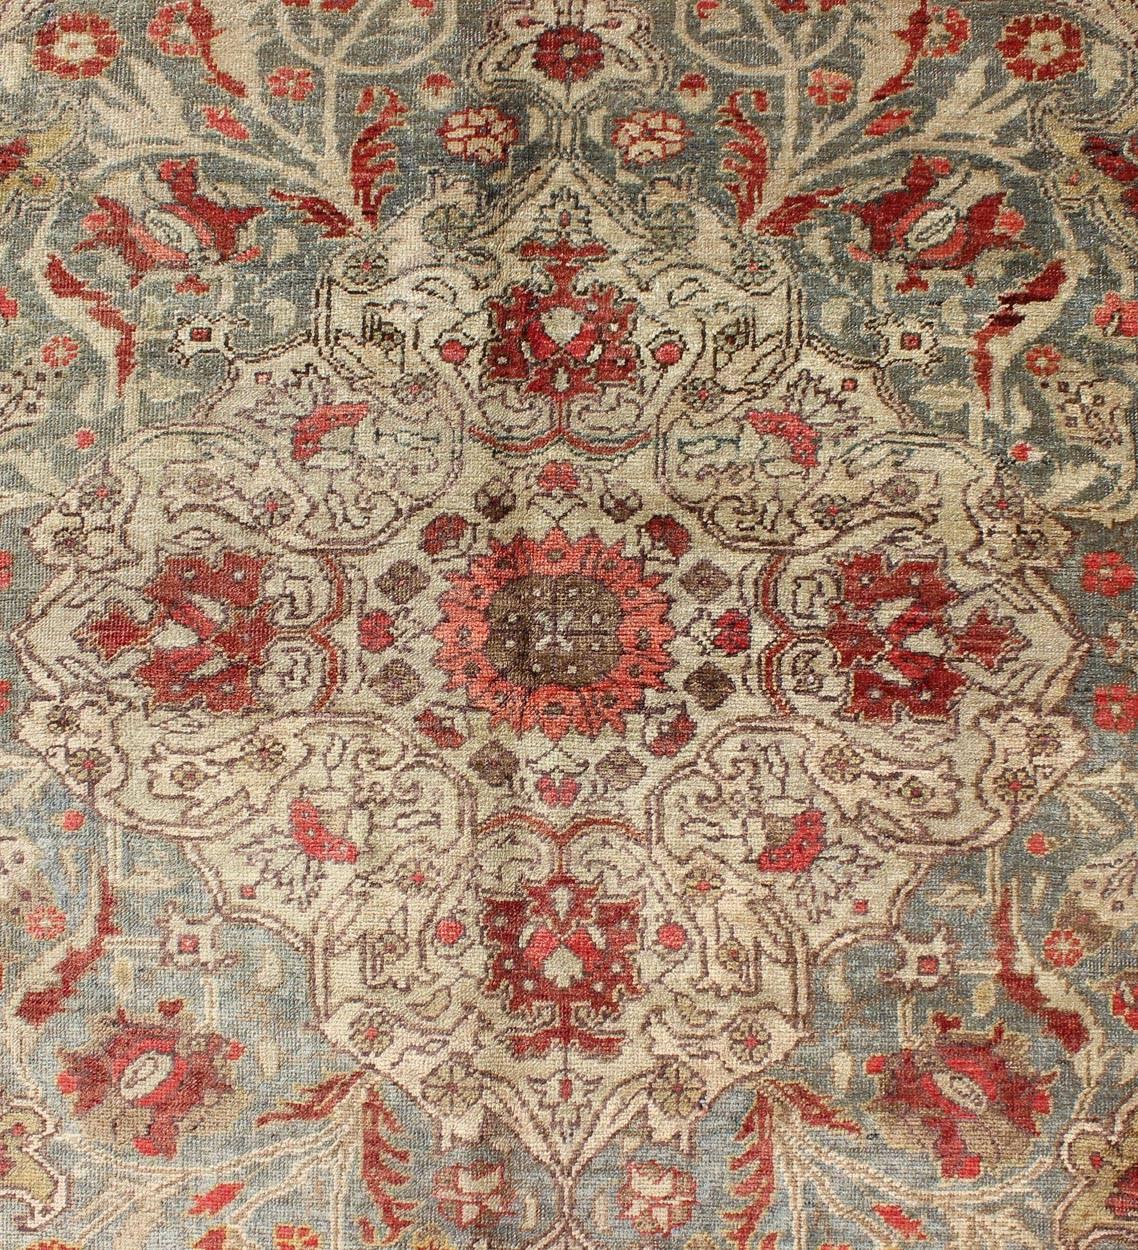 Floral Medallion Antique Turkey Sivas Rug in Light Blue, Red, Ivory, Chartreuse In Excellent Condition For Sale In Atlanta, GA